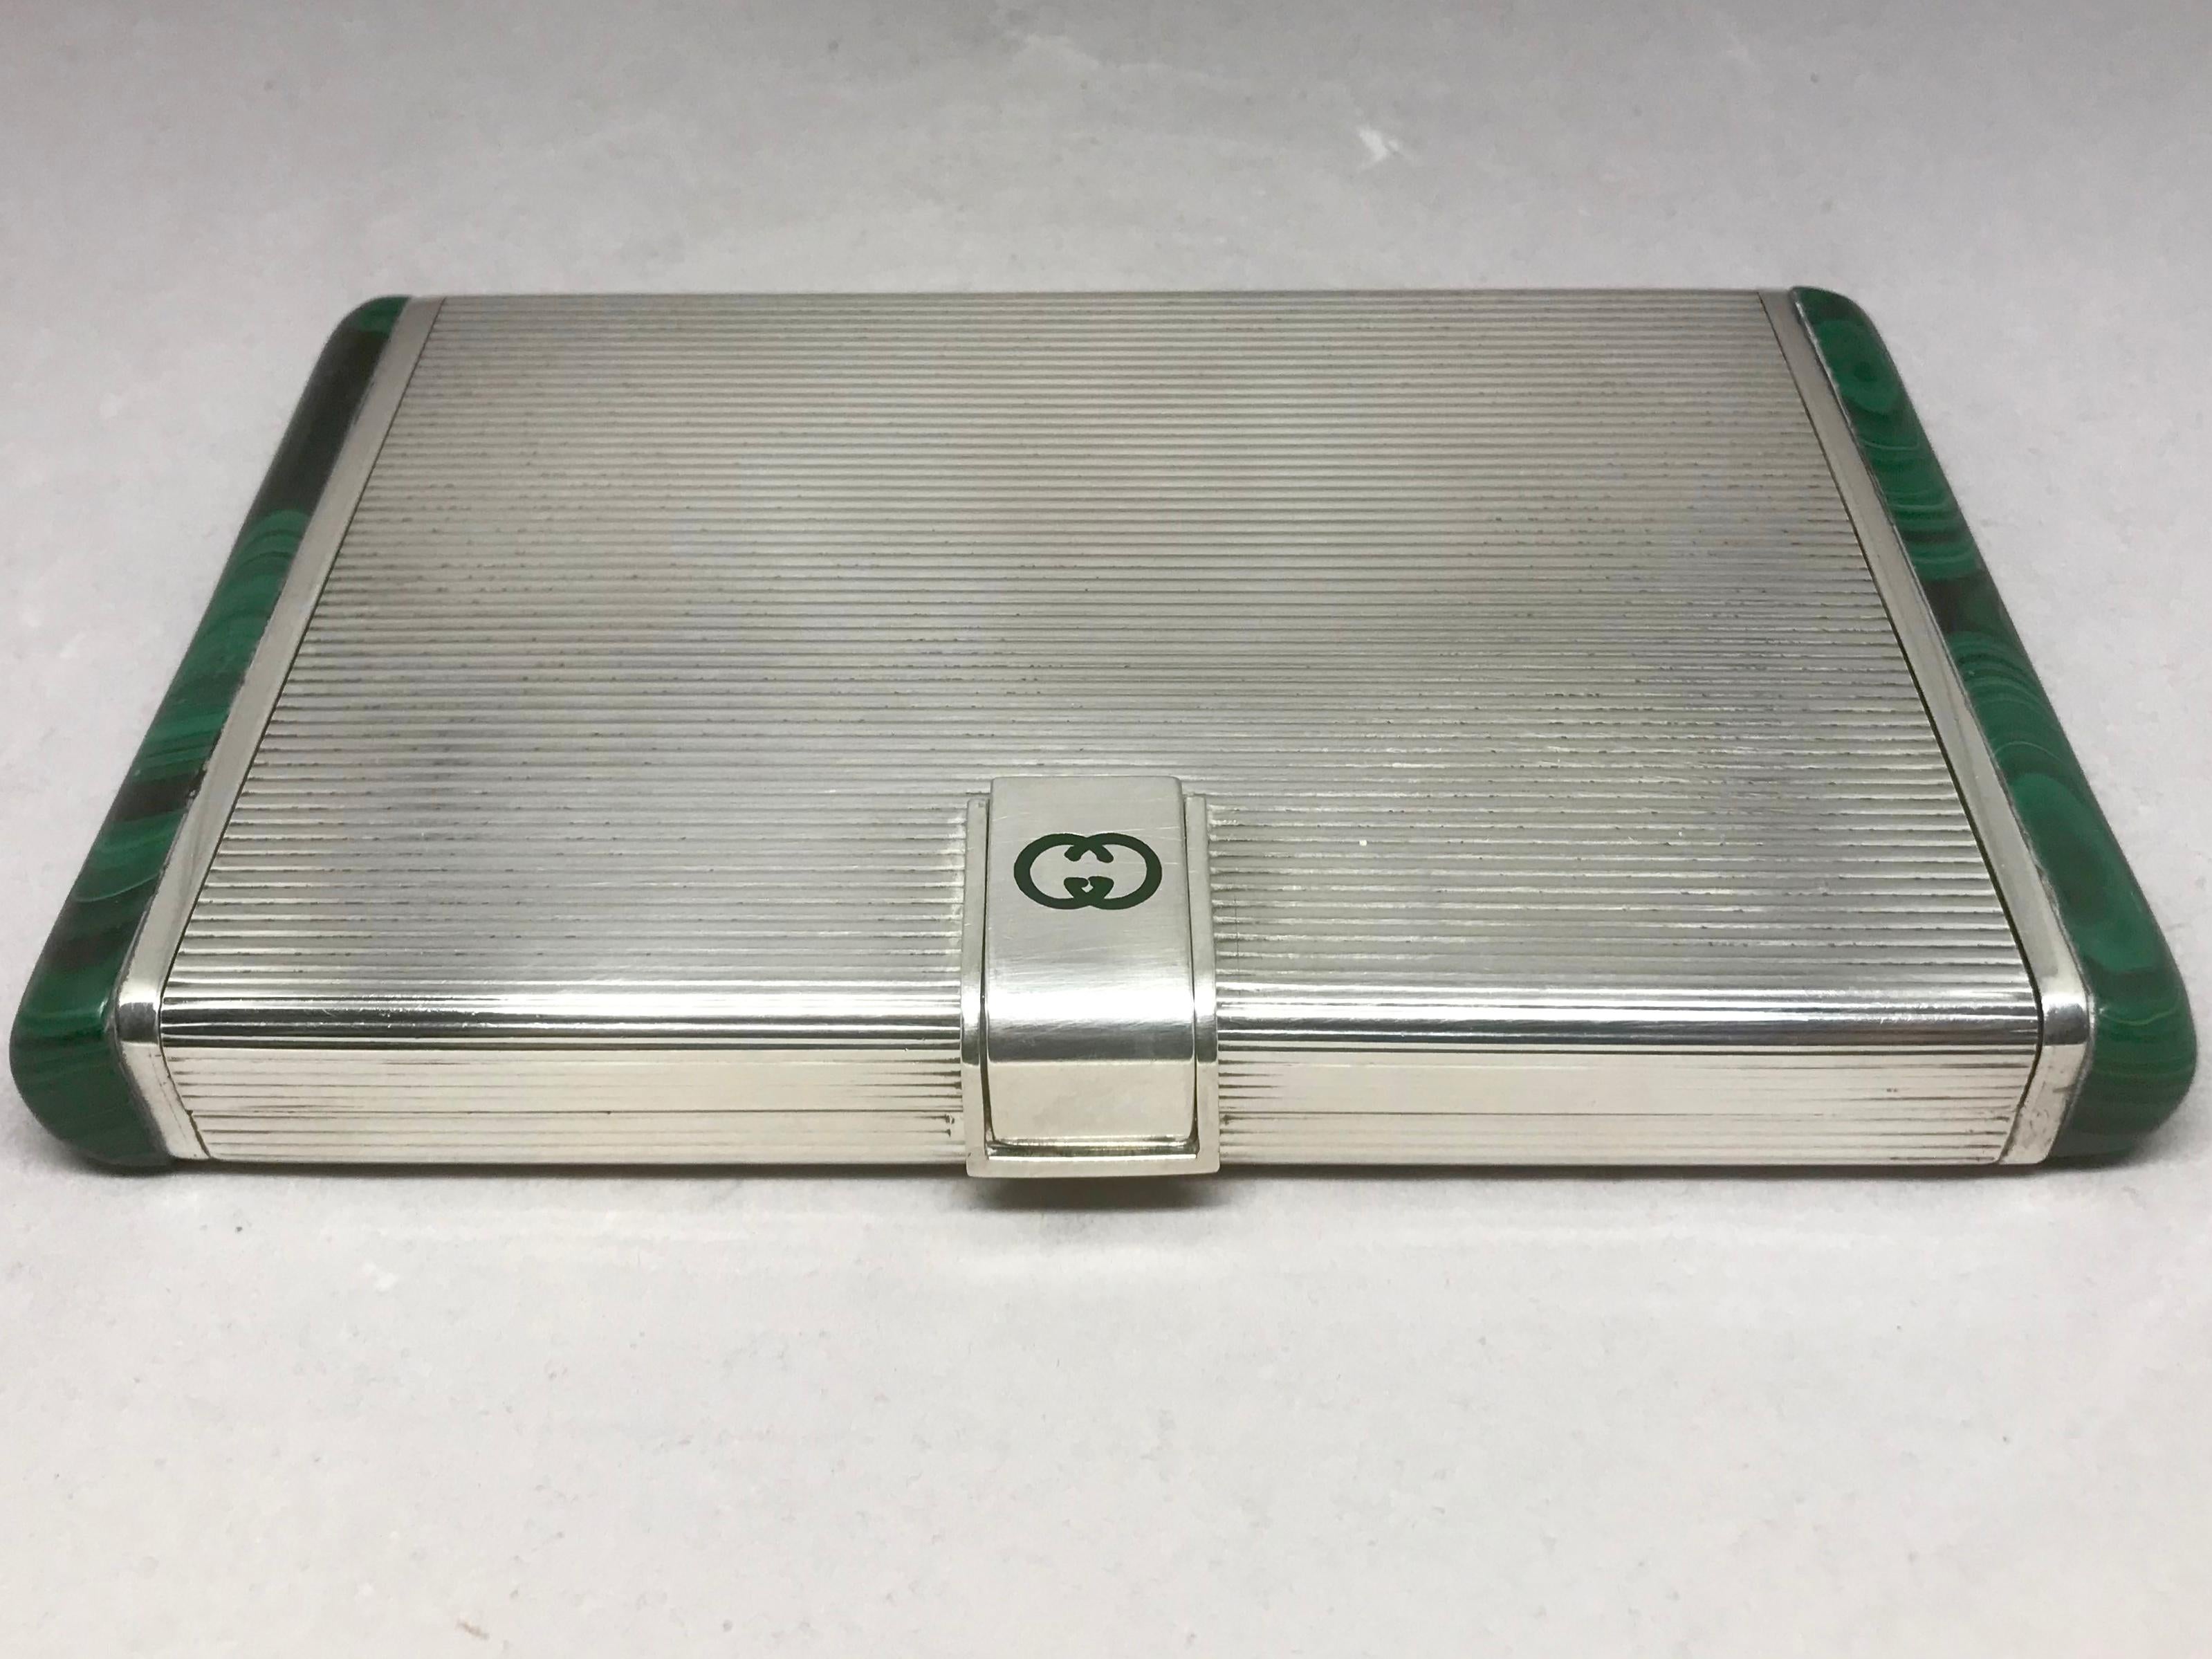 Gucci sterling silver and malachite box. Large fine ribbed sterling cigarette case / minaudiere with malachite ends and clasp with inset malachite early vintage GG logo. Stamped with silver hallmarks and early cursive Gucci logo. Italy,